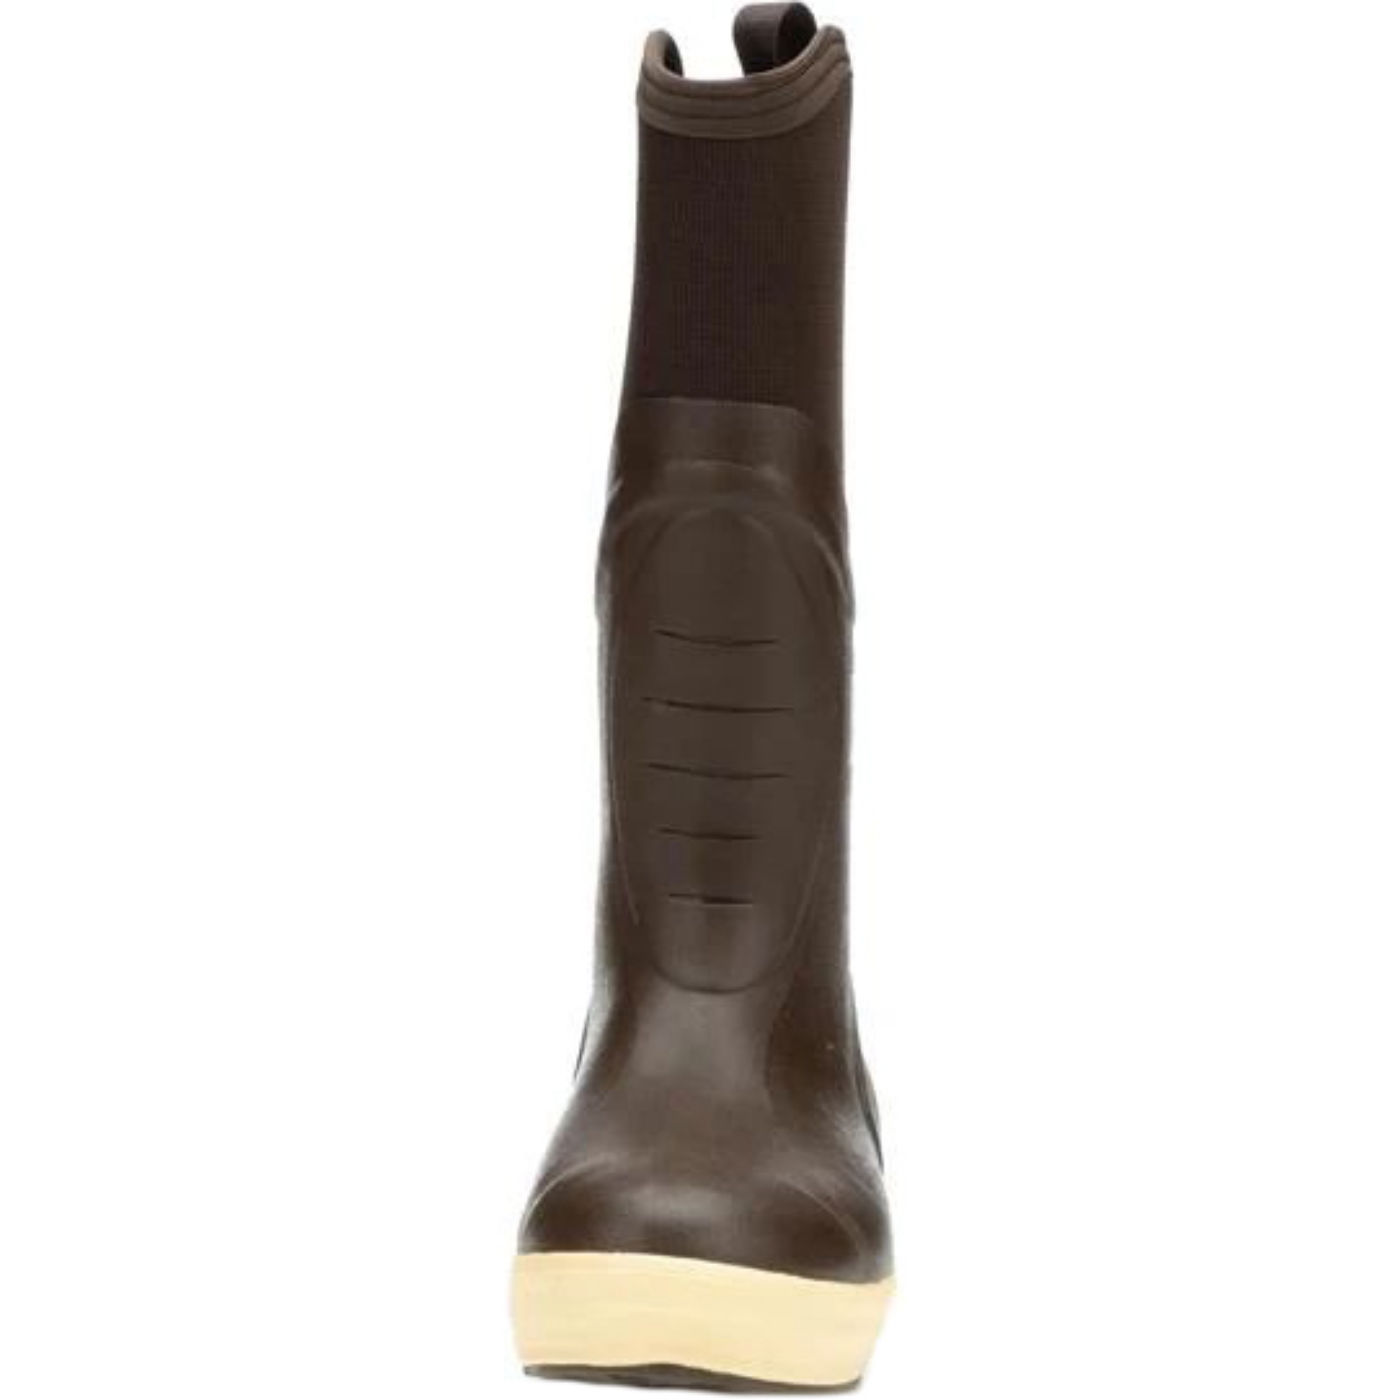 Men's 15 in Insulated Elite Legacy Boot Size 10(M) - image 3 of 7